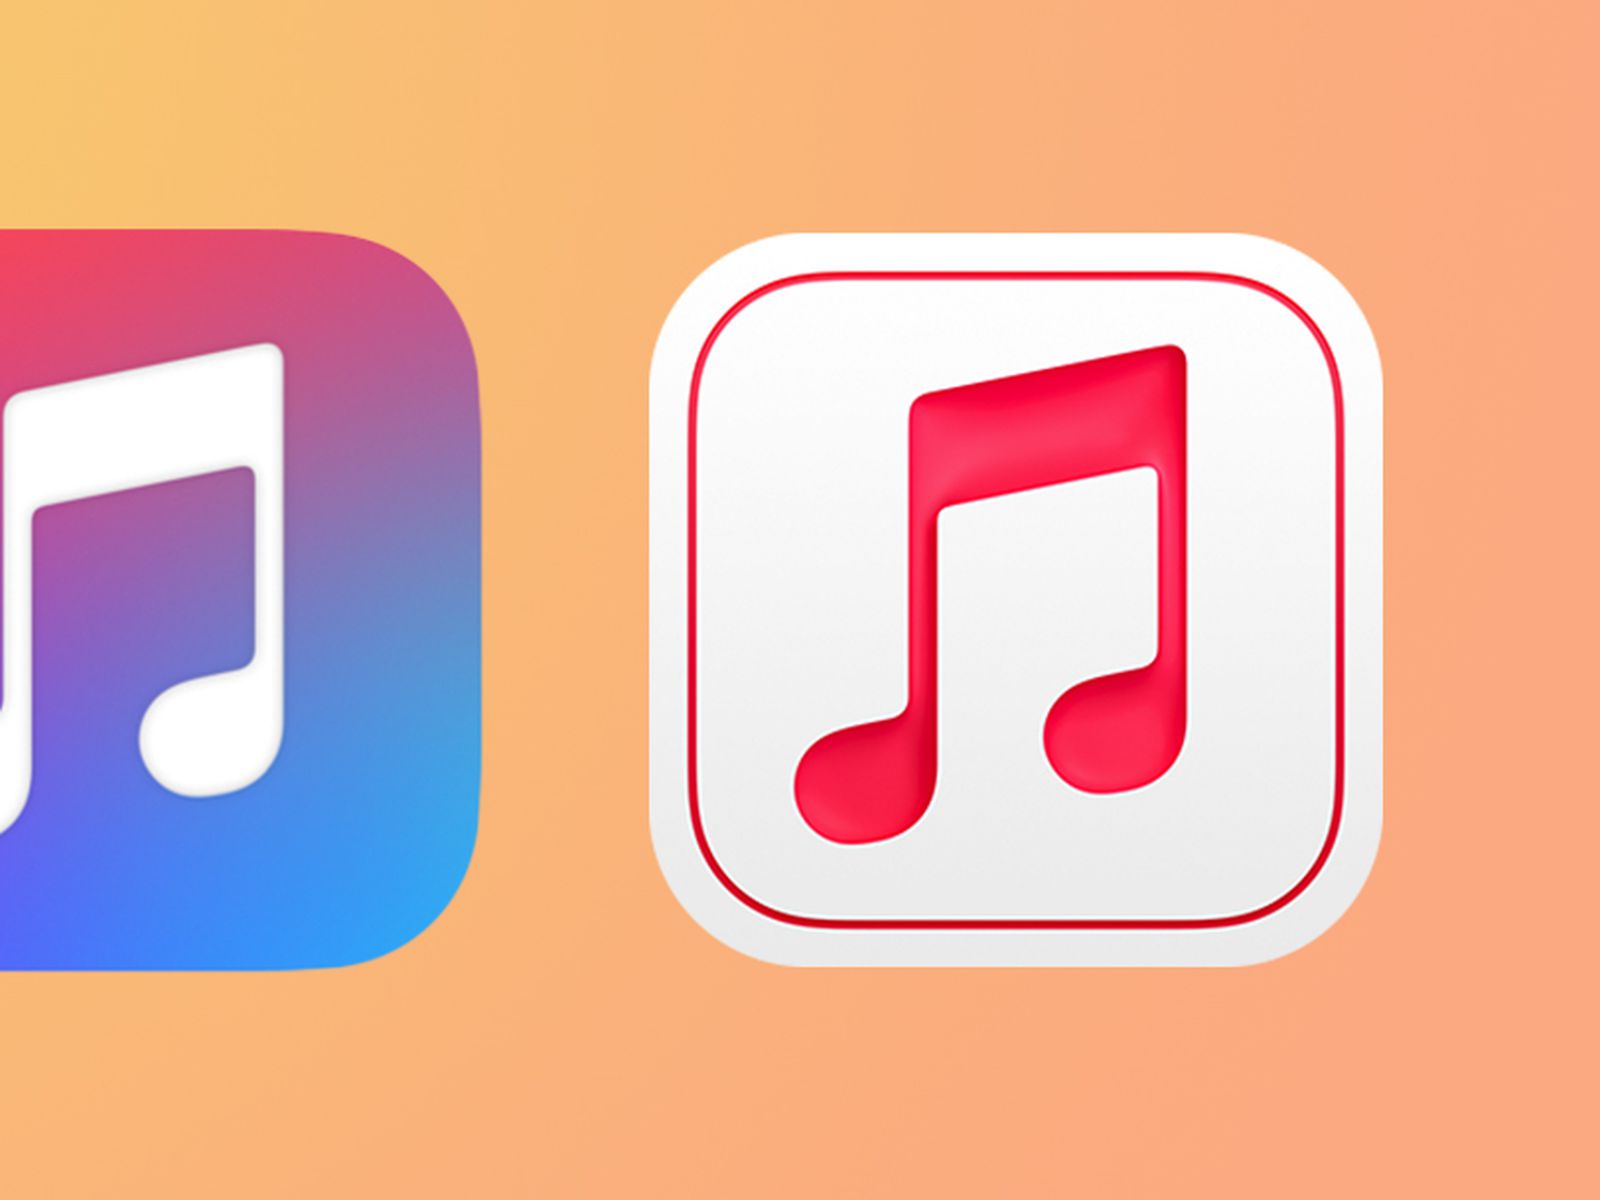 Apple S Revamped Apple Music For Artists Icon Leads To Speculation About Ios 15 Design Plans Macrumors